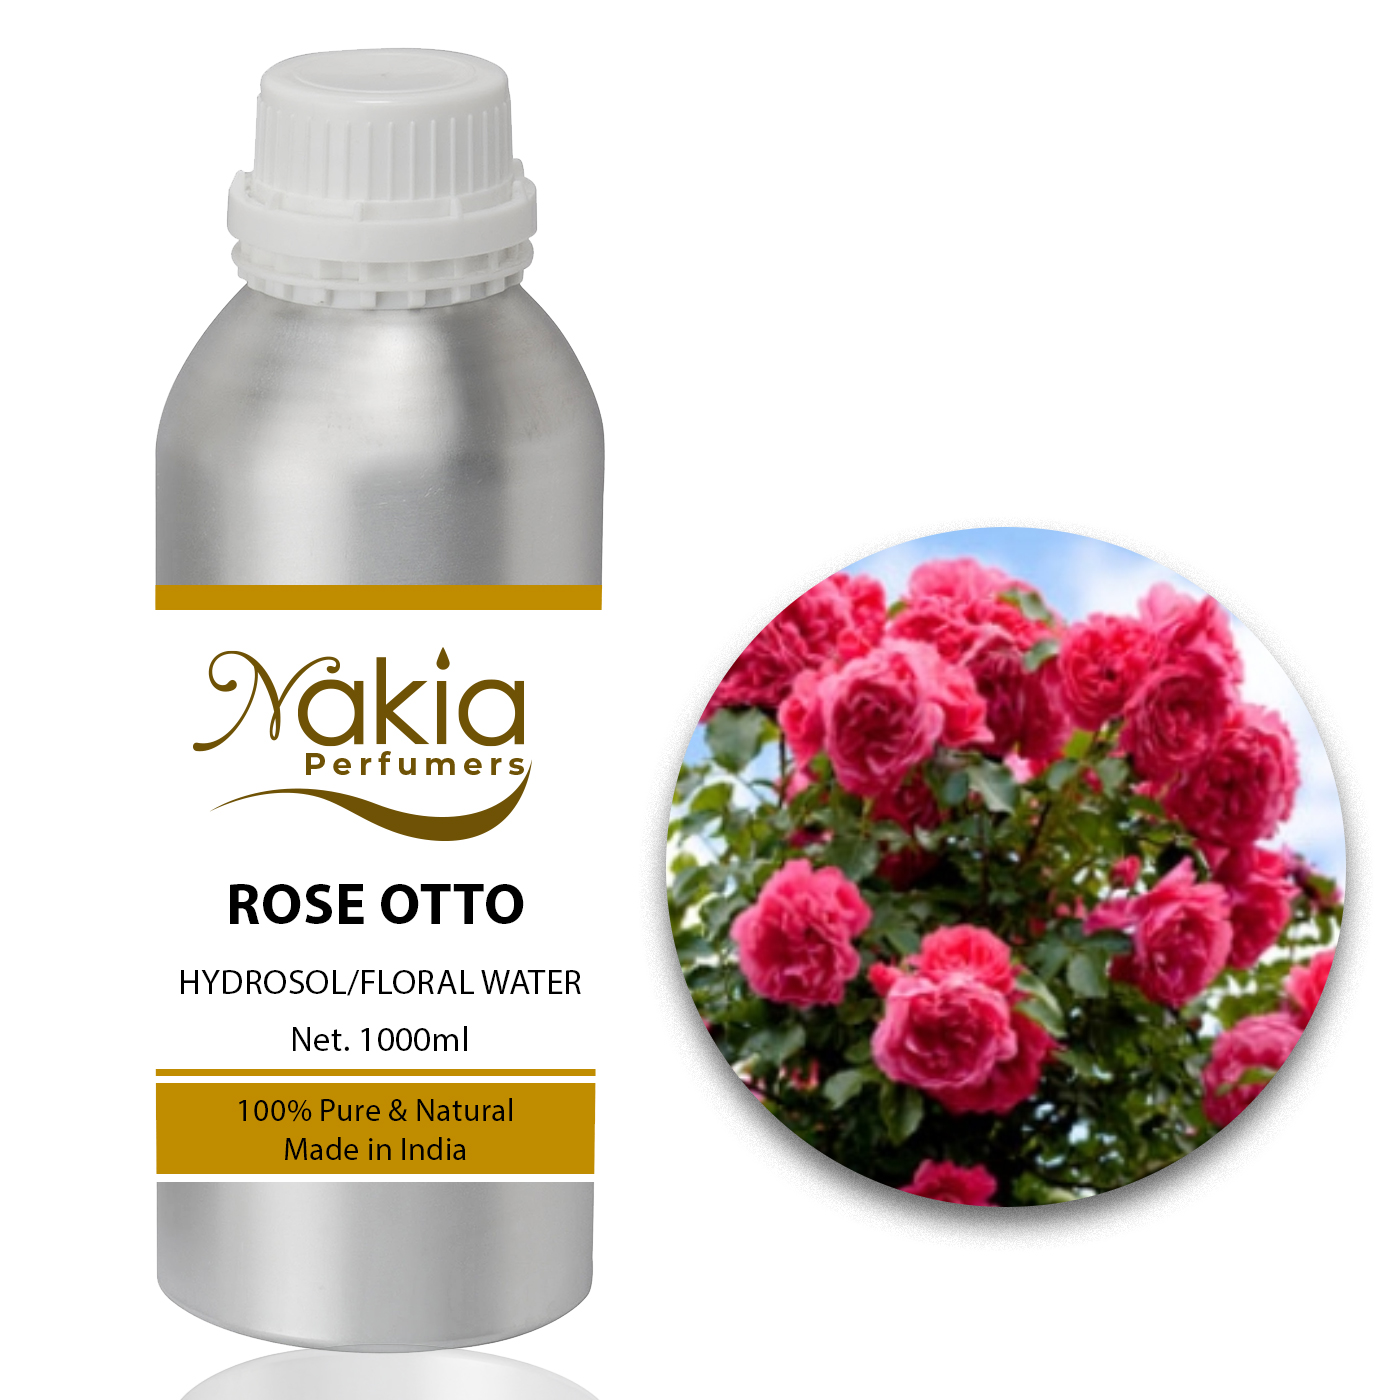 ROSE-OTTO FLORAL WATER/HYDROSOL